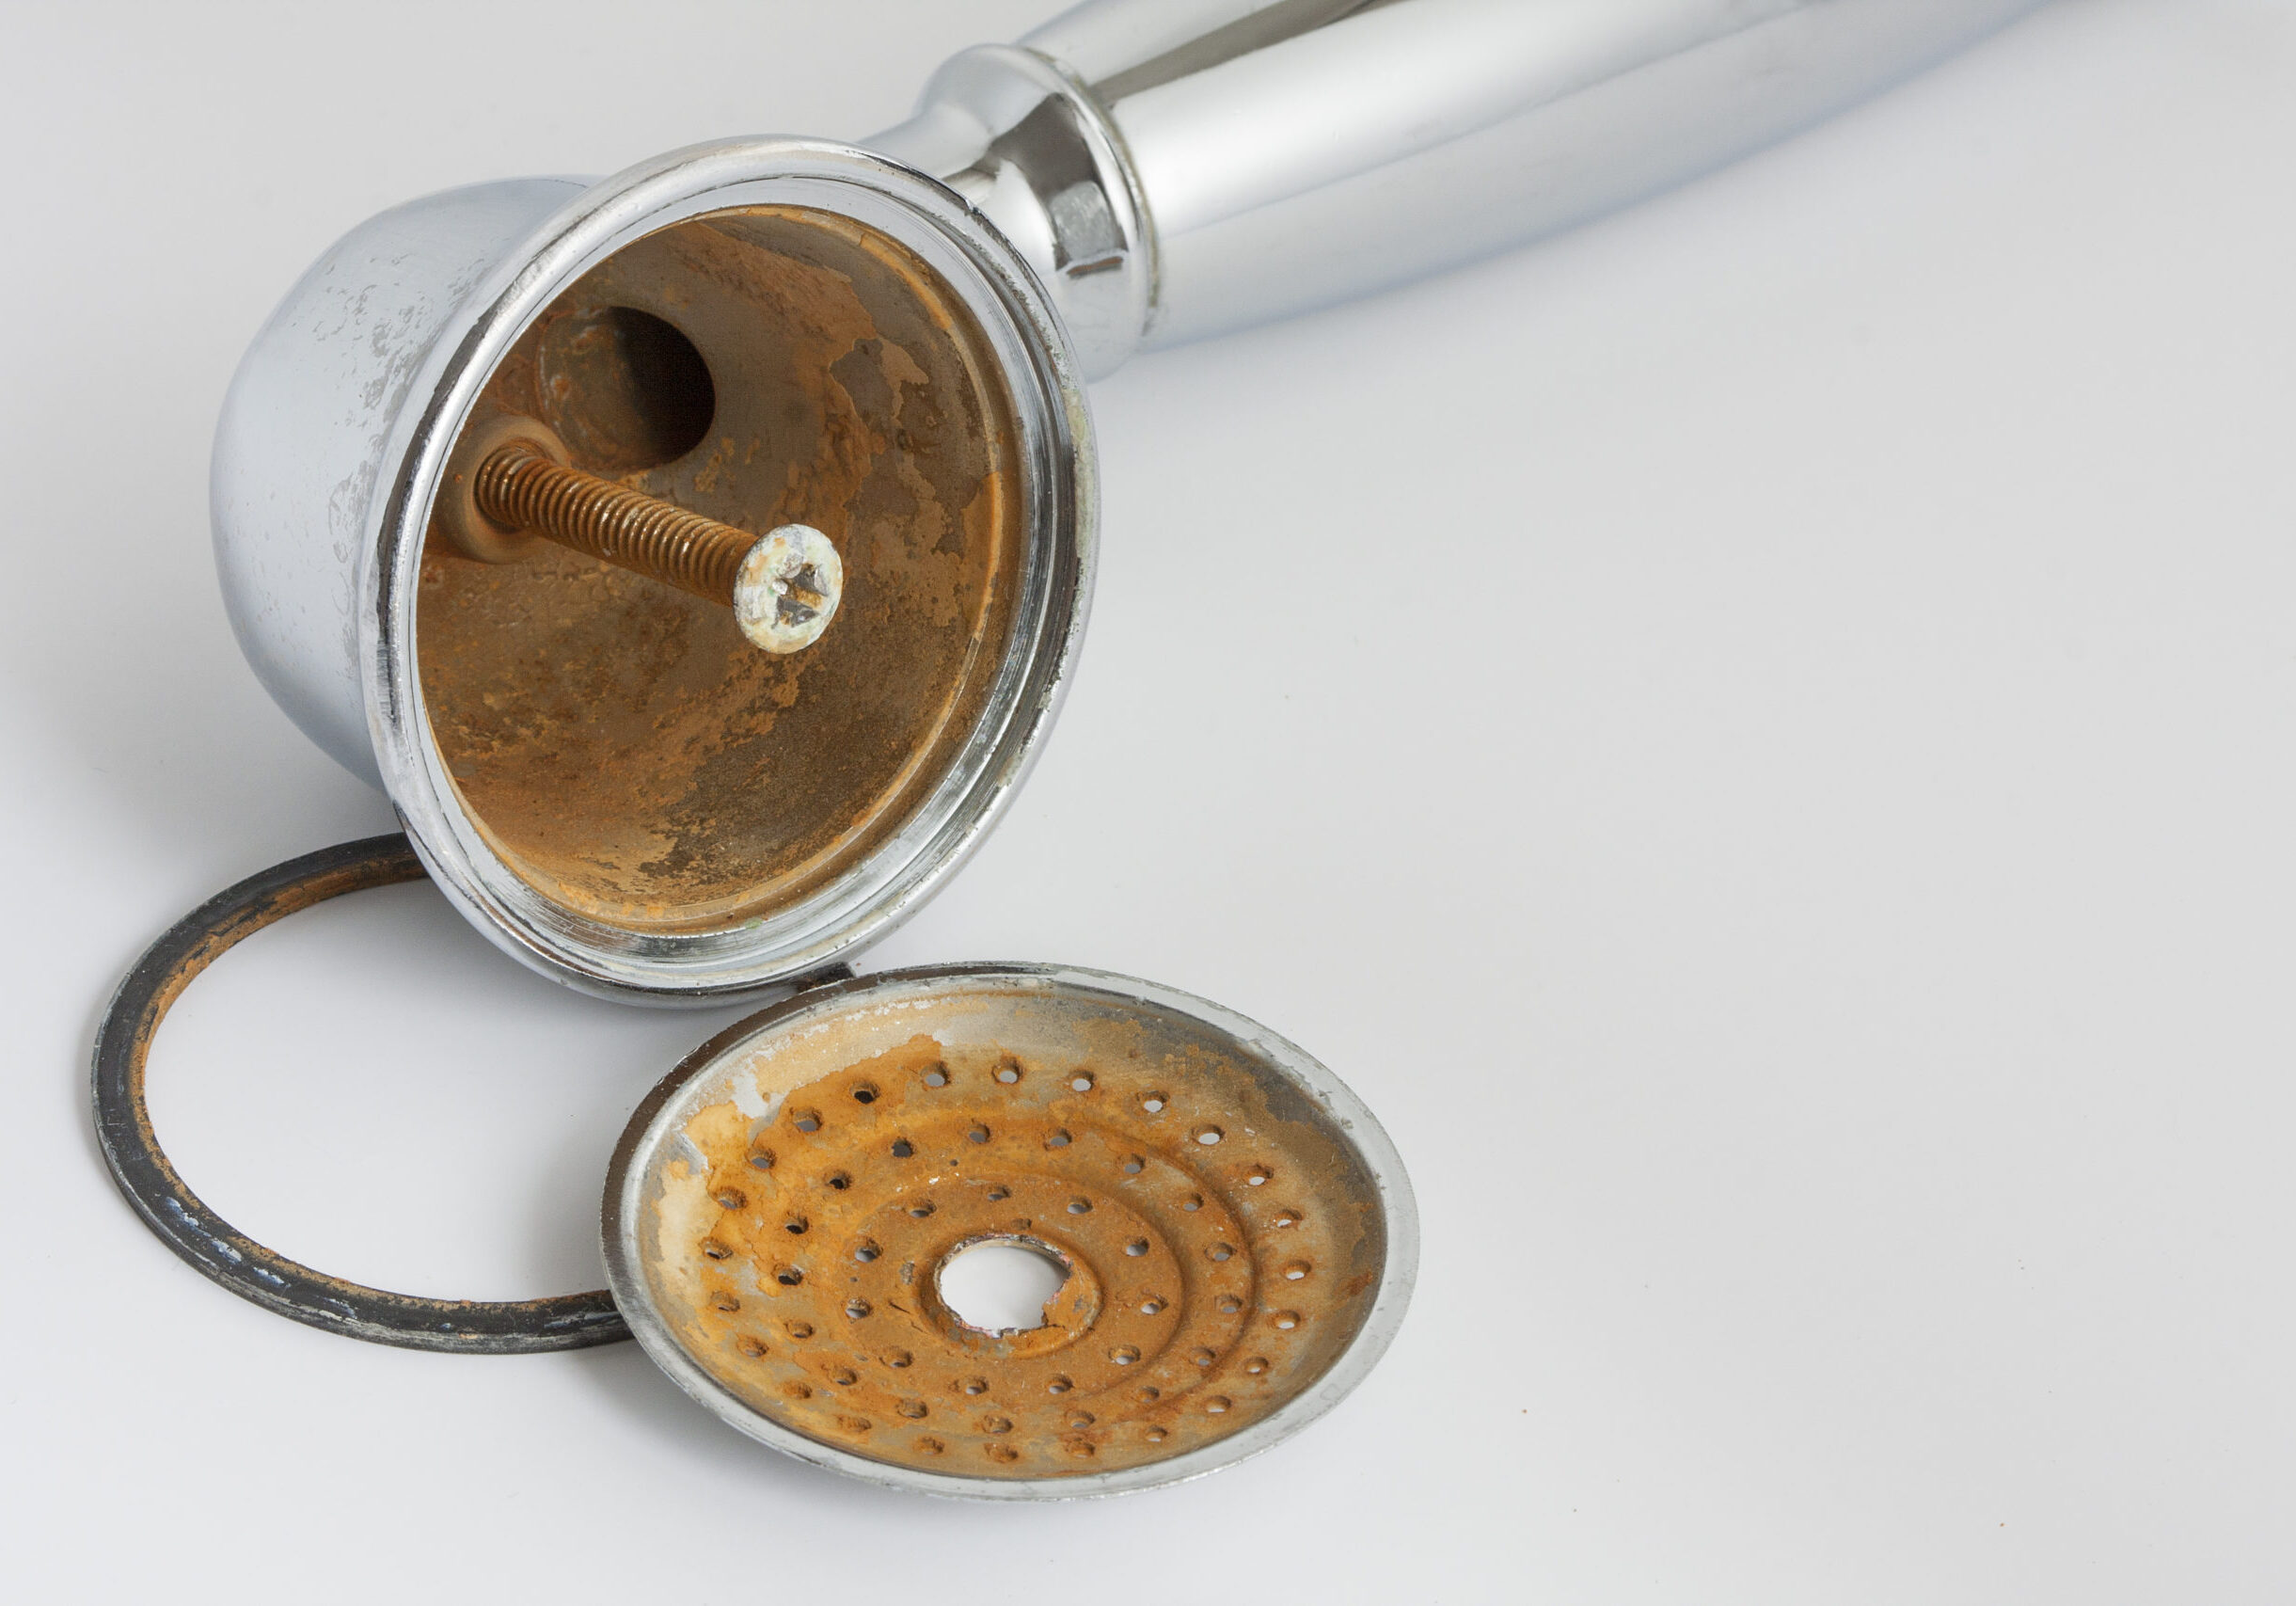 Broken shower head with limescale and rust on it